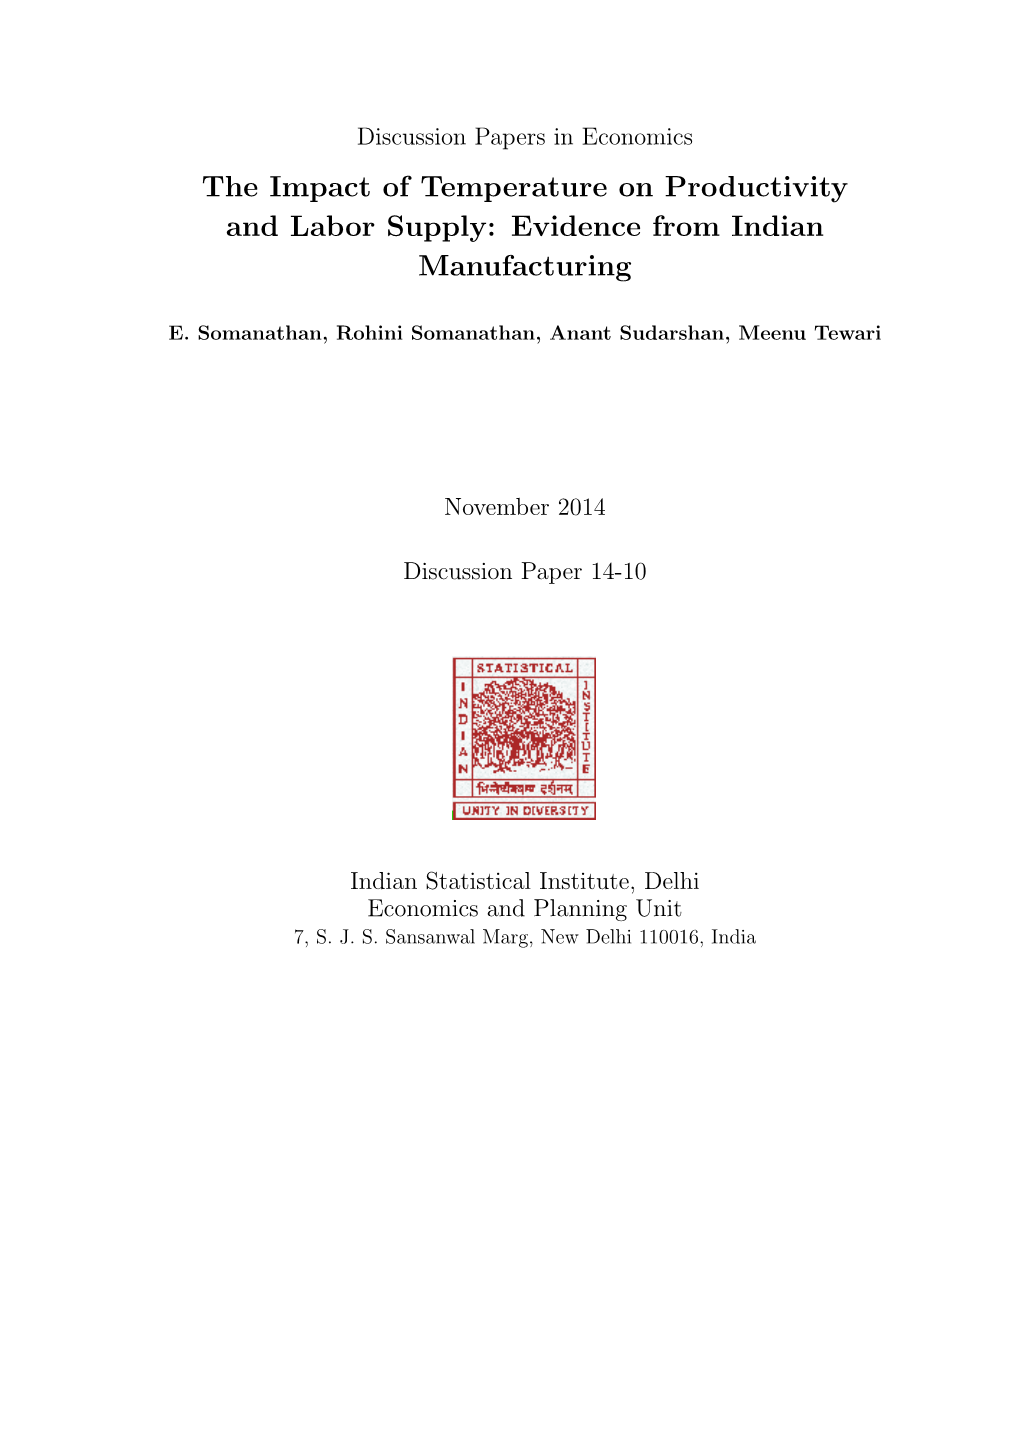 The Impact of Temperature on Productivity and Labor Supply: Evidence from Indian Manufacturing